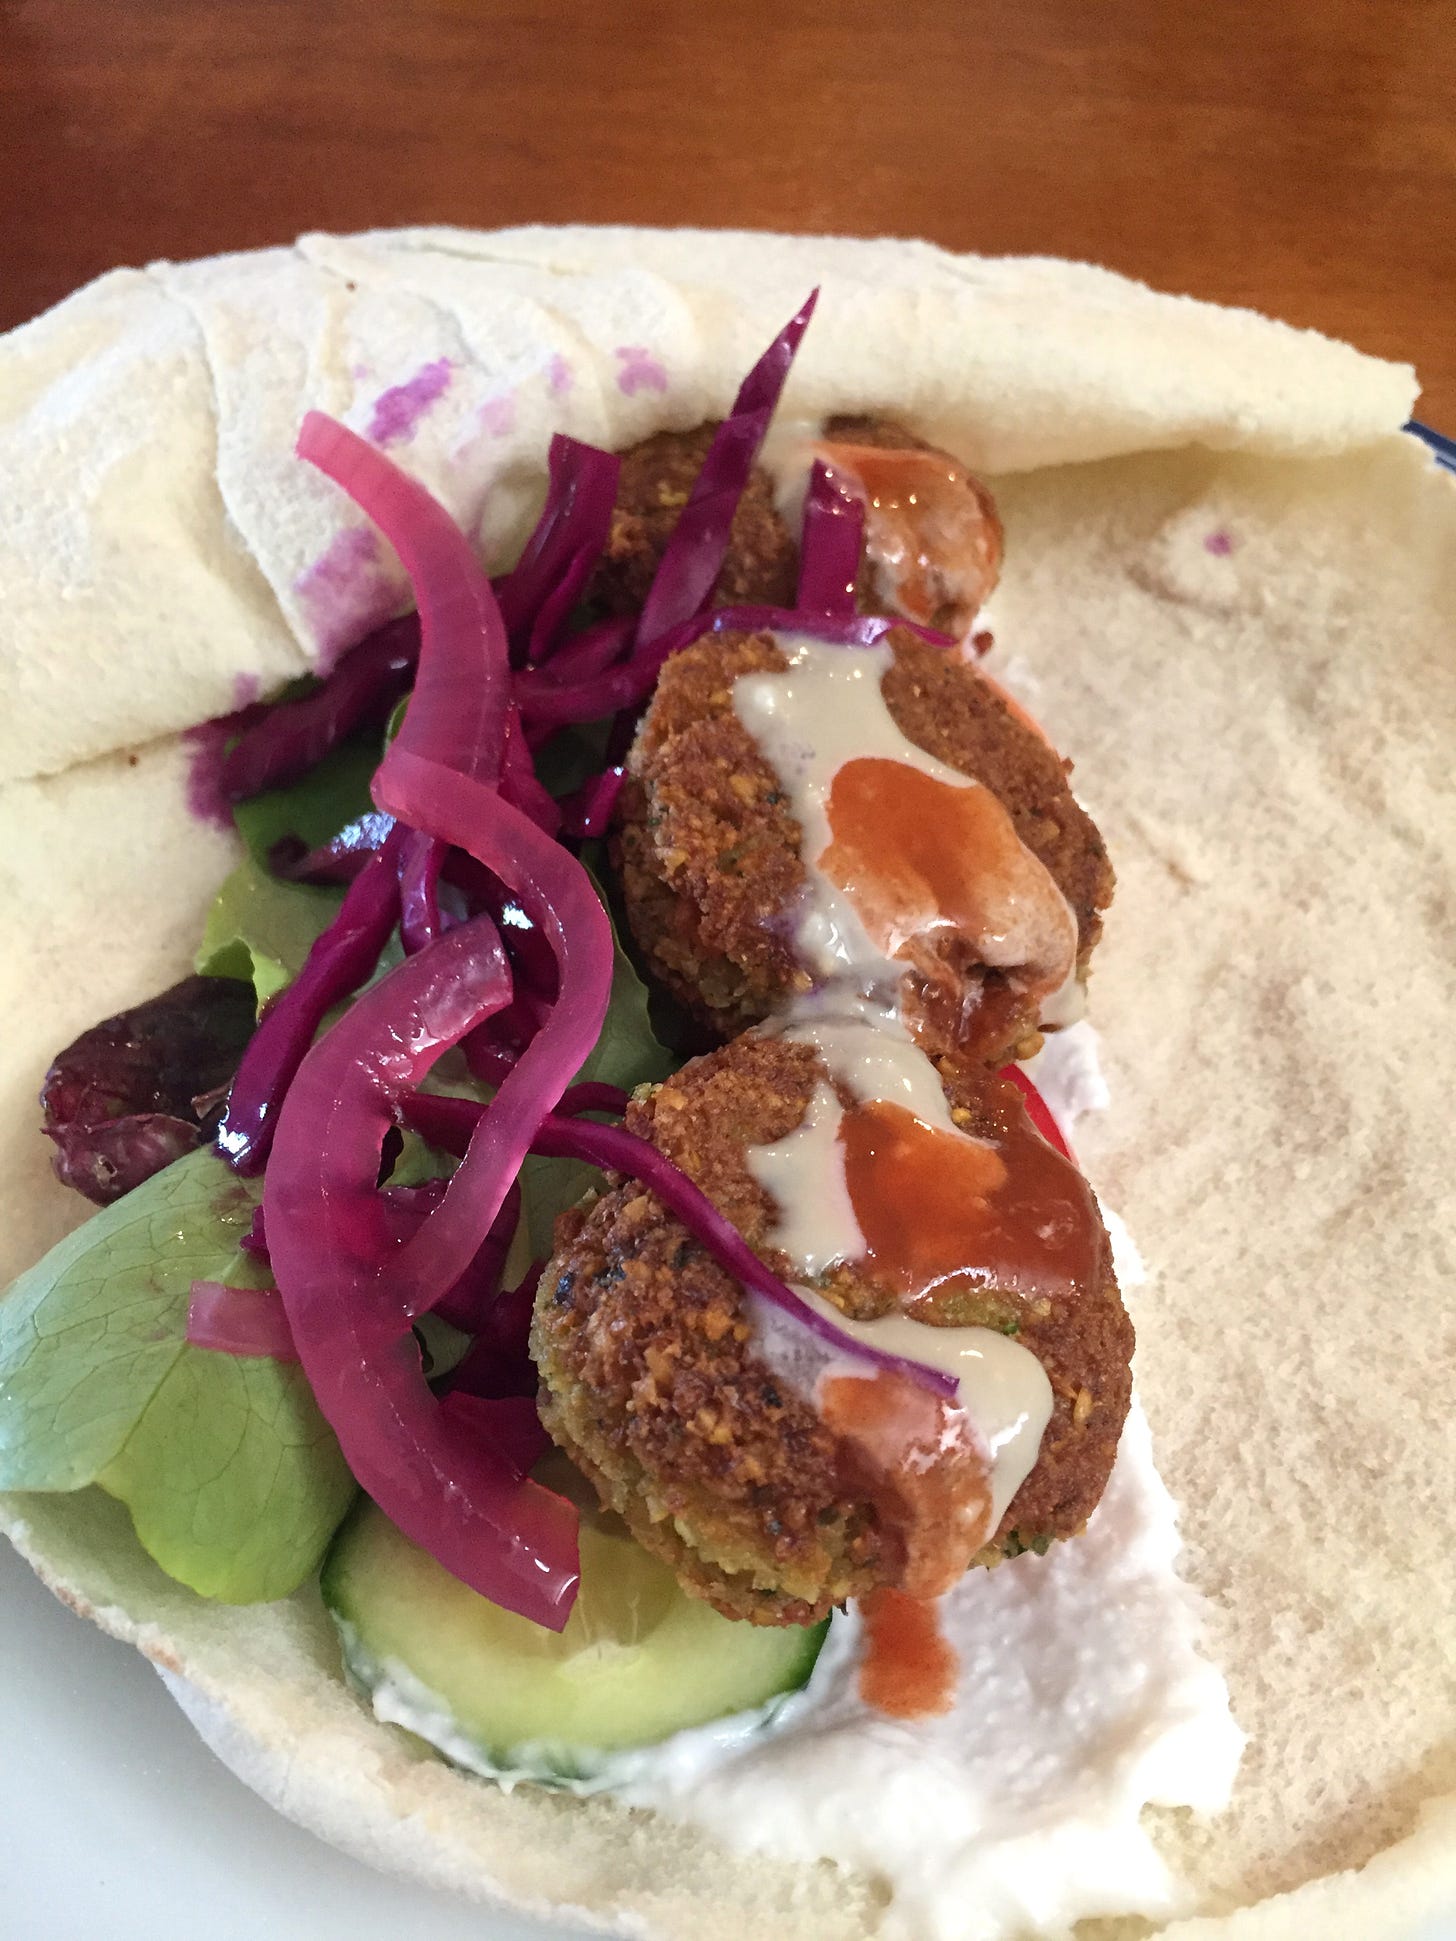 an opened pita pocket filled with falafel patties, cucumber, lettuce, and pickled red cabbage and onion. White garlic sauce is visible on the bottom, and a drizzle of tahini and hot sauce on top.